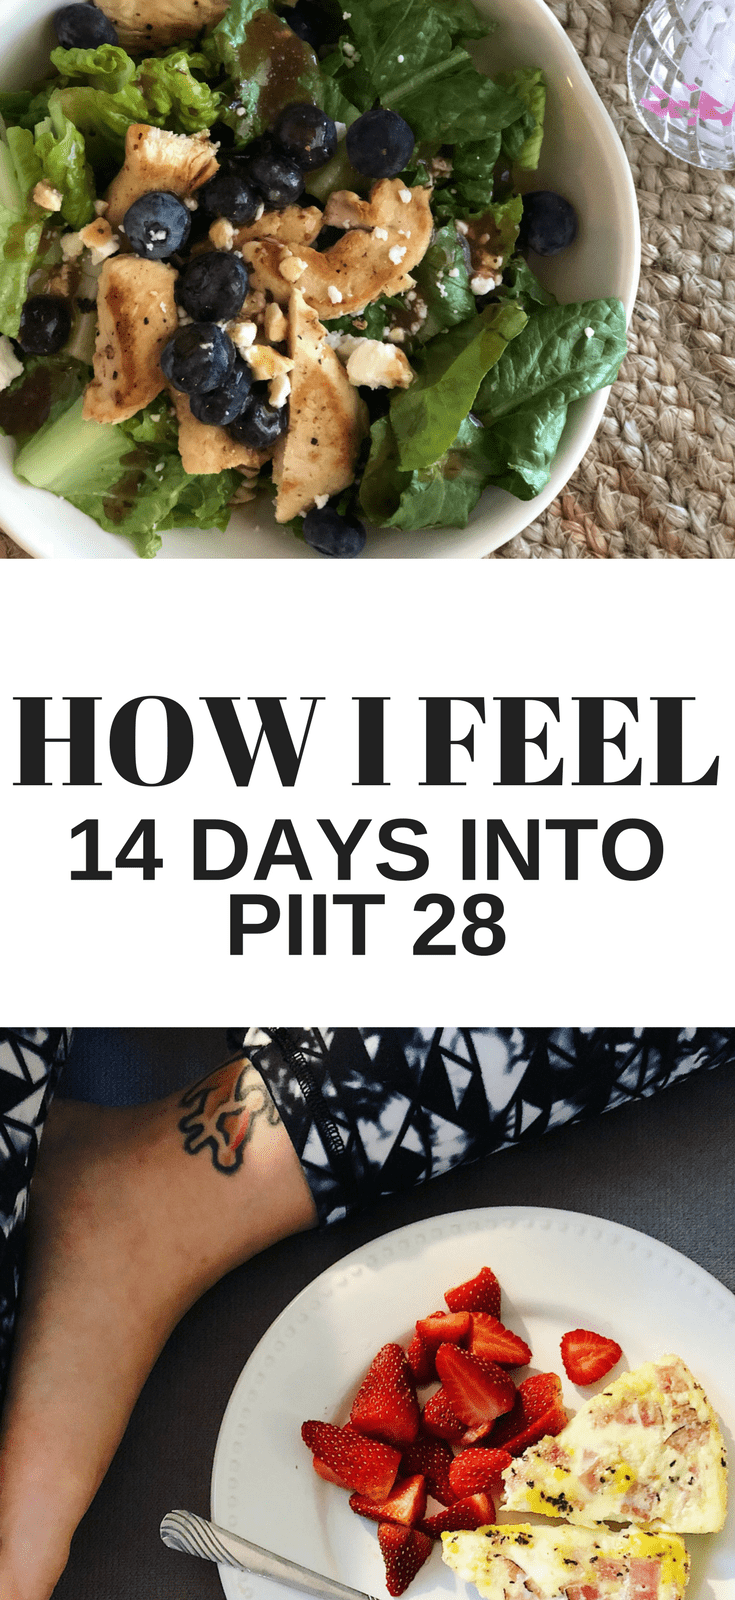 Why I started PIIT28 - and how I feel after two weeks